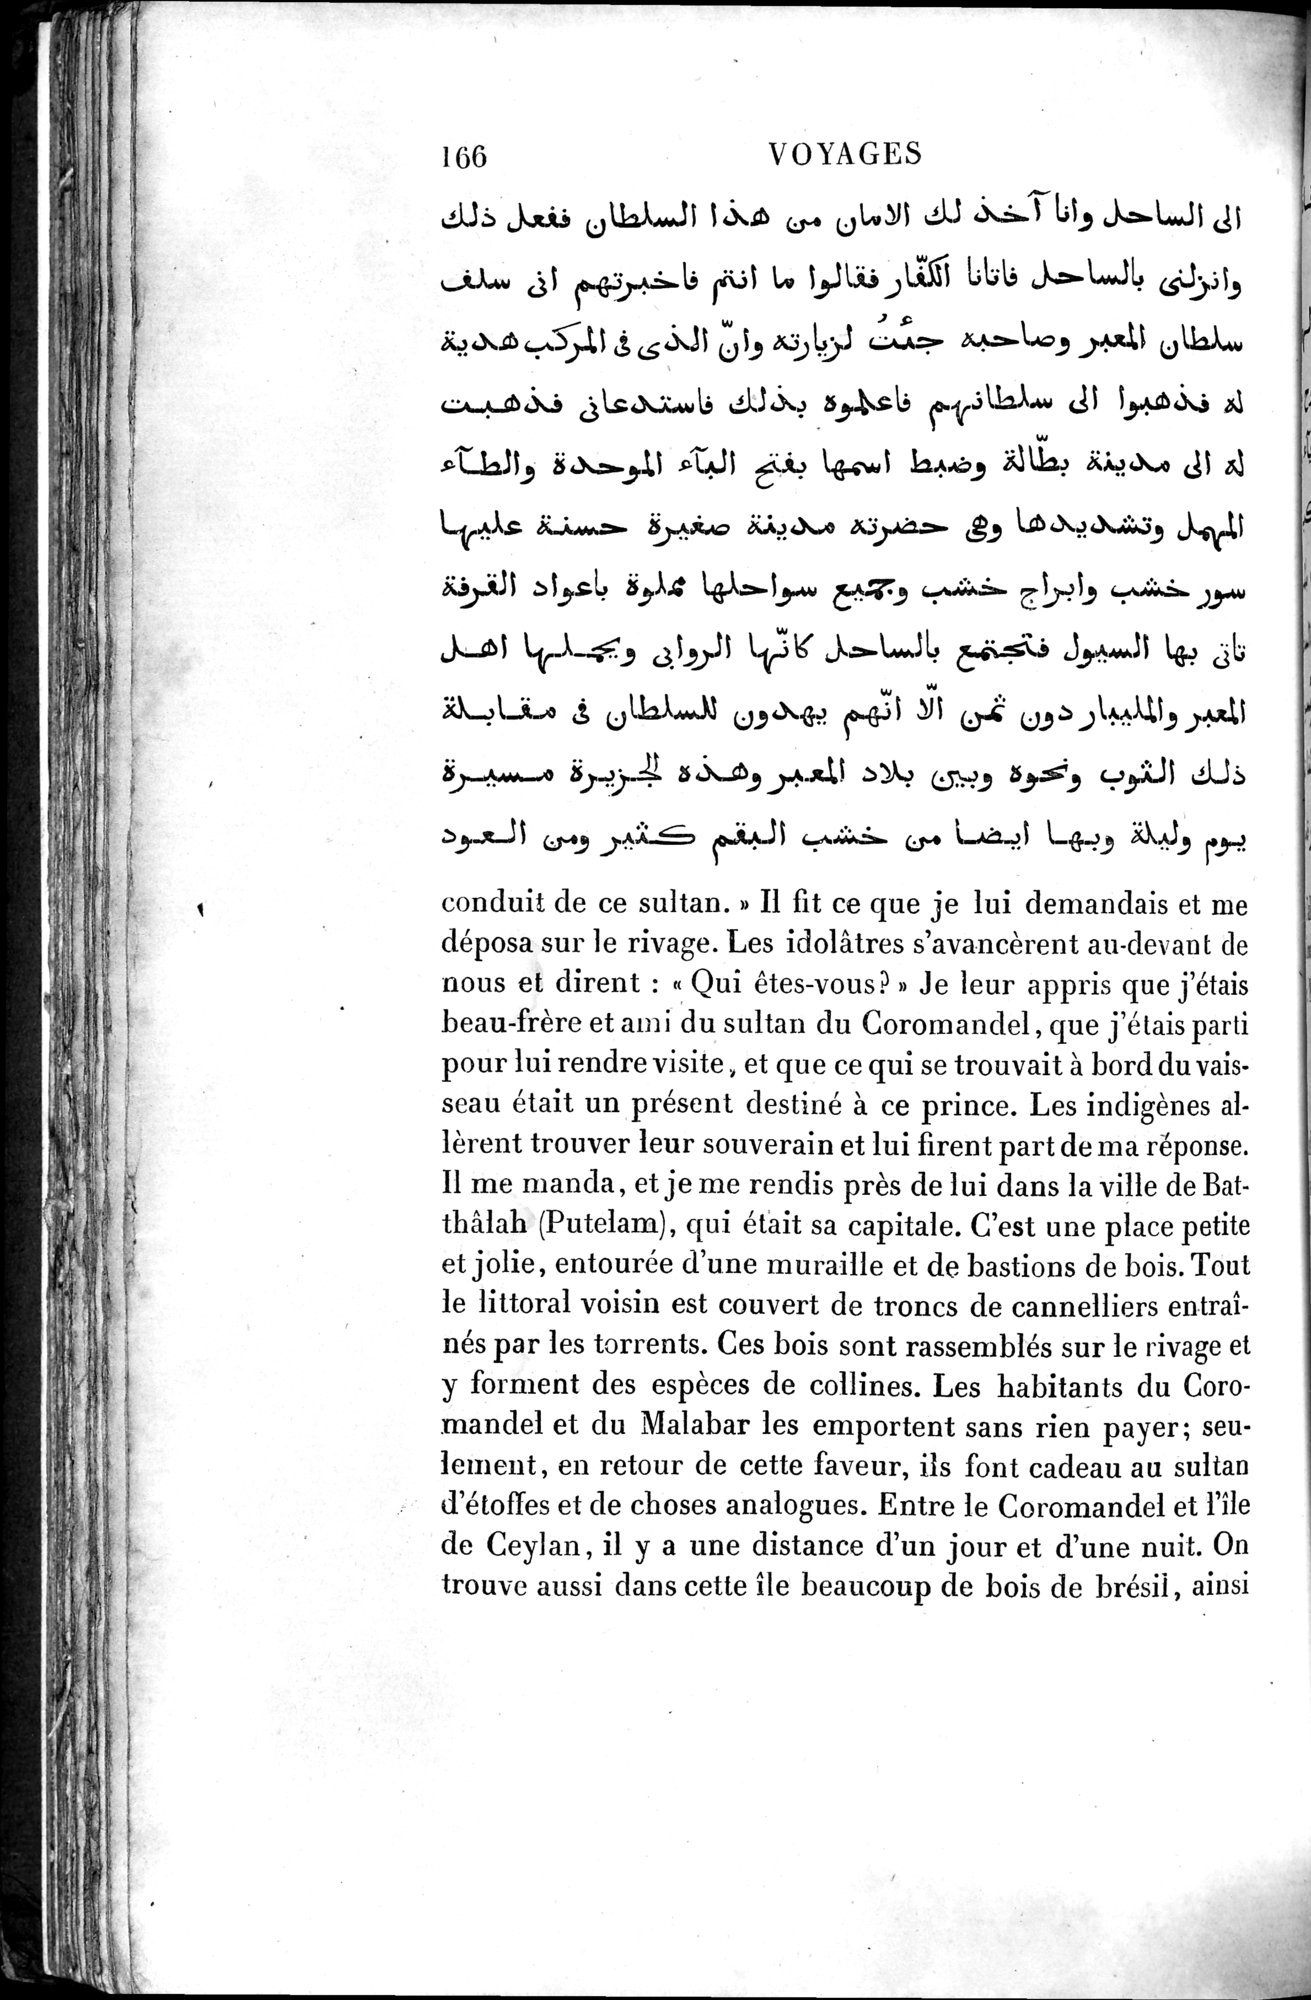 Voyages d'Ibn Batoutah : vol.4 / Page 178 (Grayscale High Resolution Image)